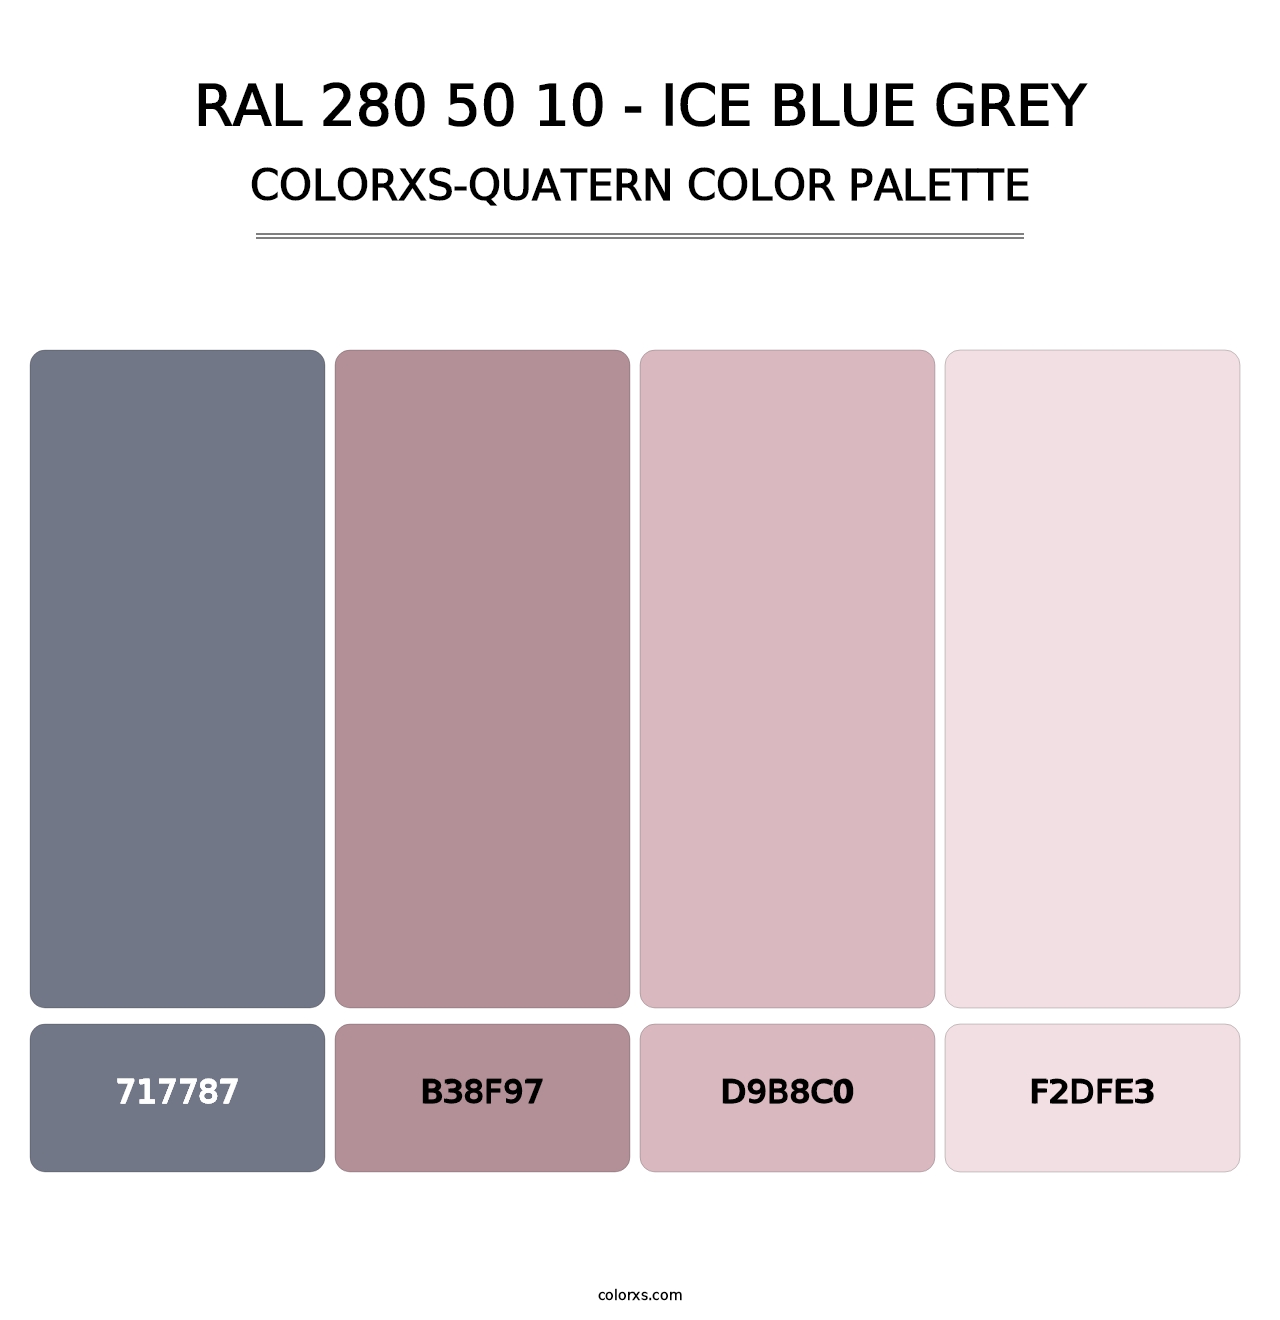 RAL 280 50 10 - Ice Blue Grey - Colorxs Quatern Palette